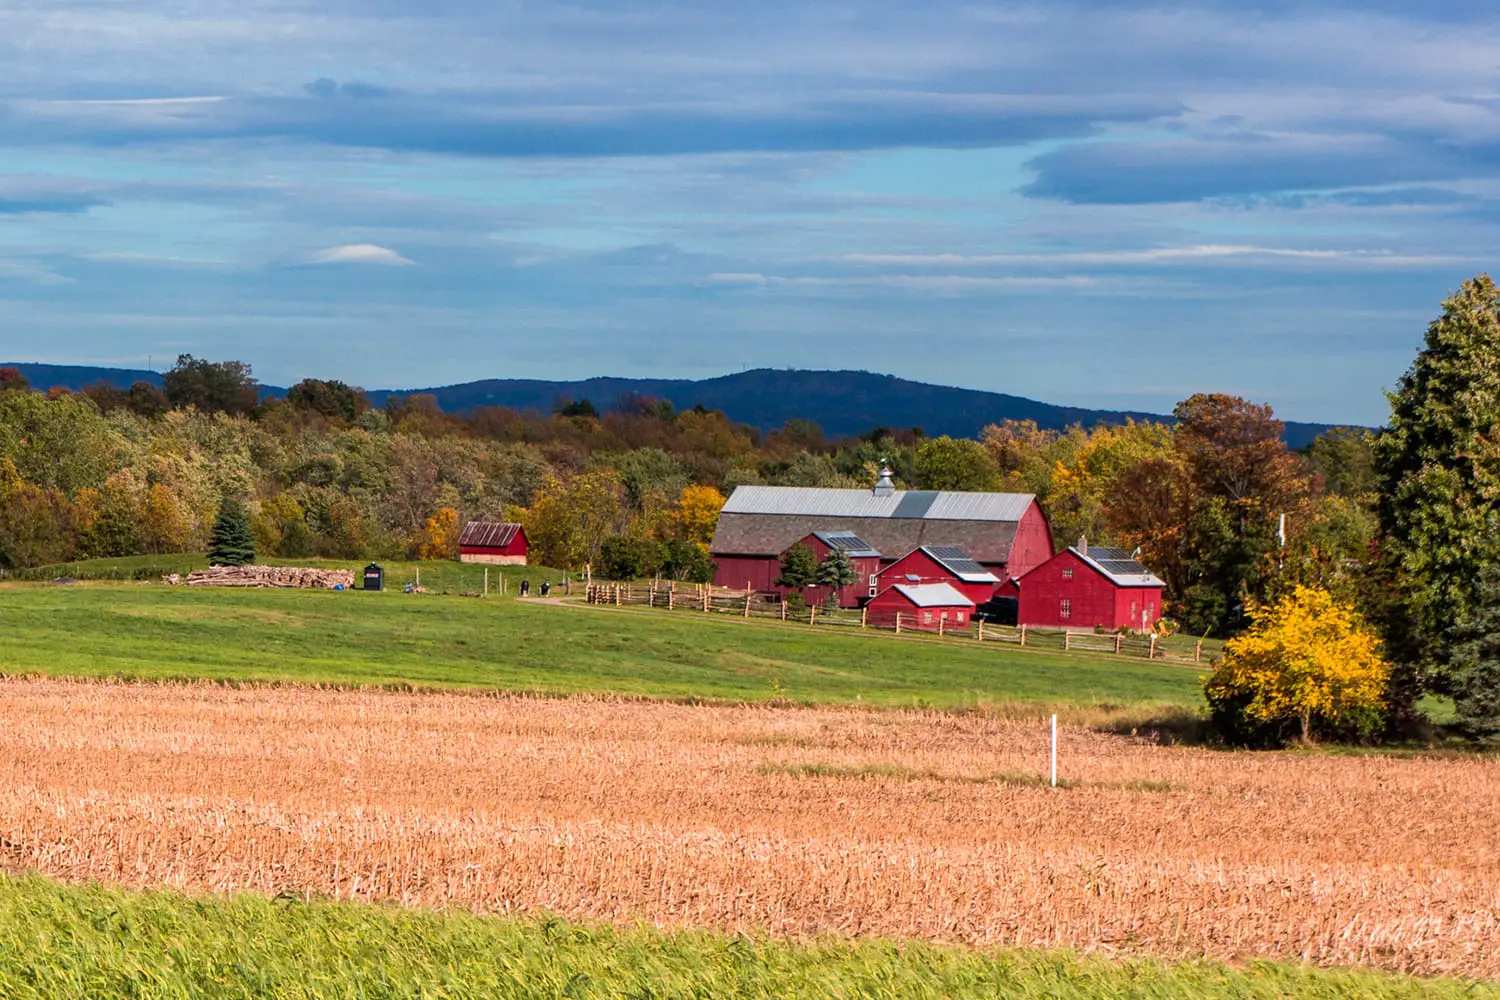 Farm on Grand Isle, one of the Lake Champlain Islands in Vermont, USA